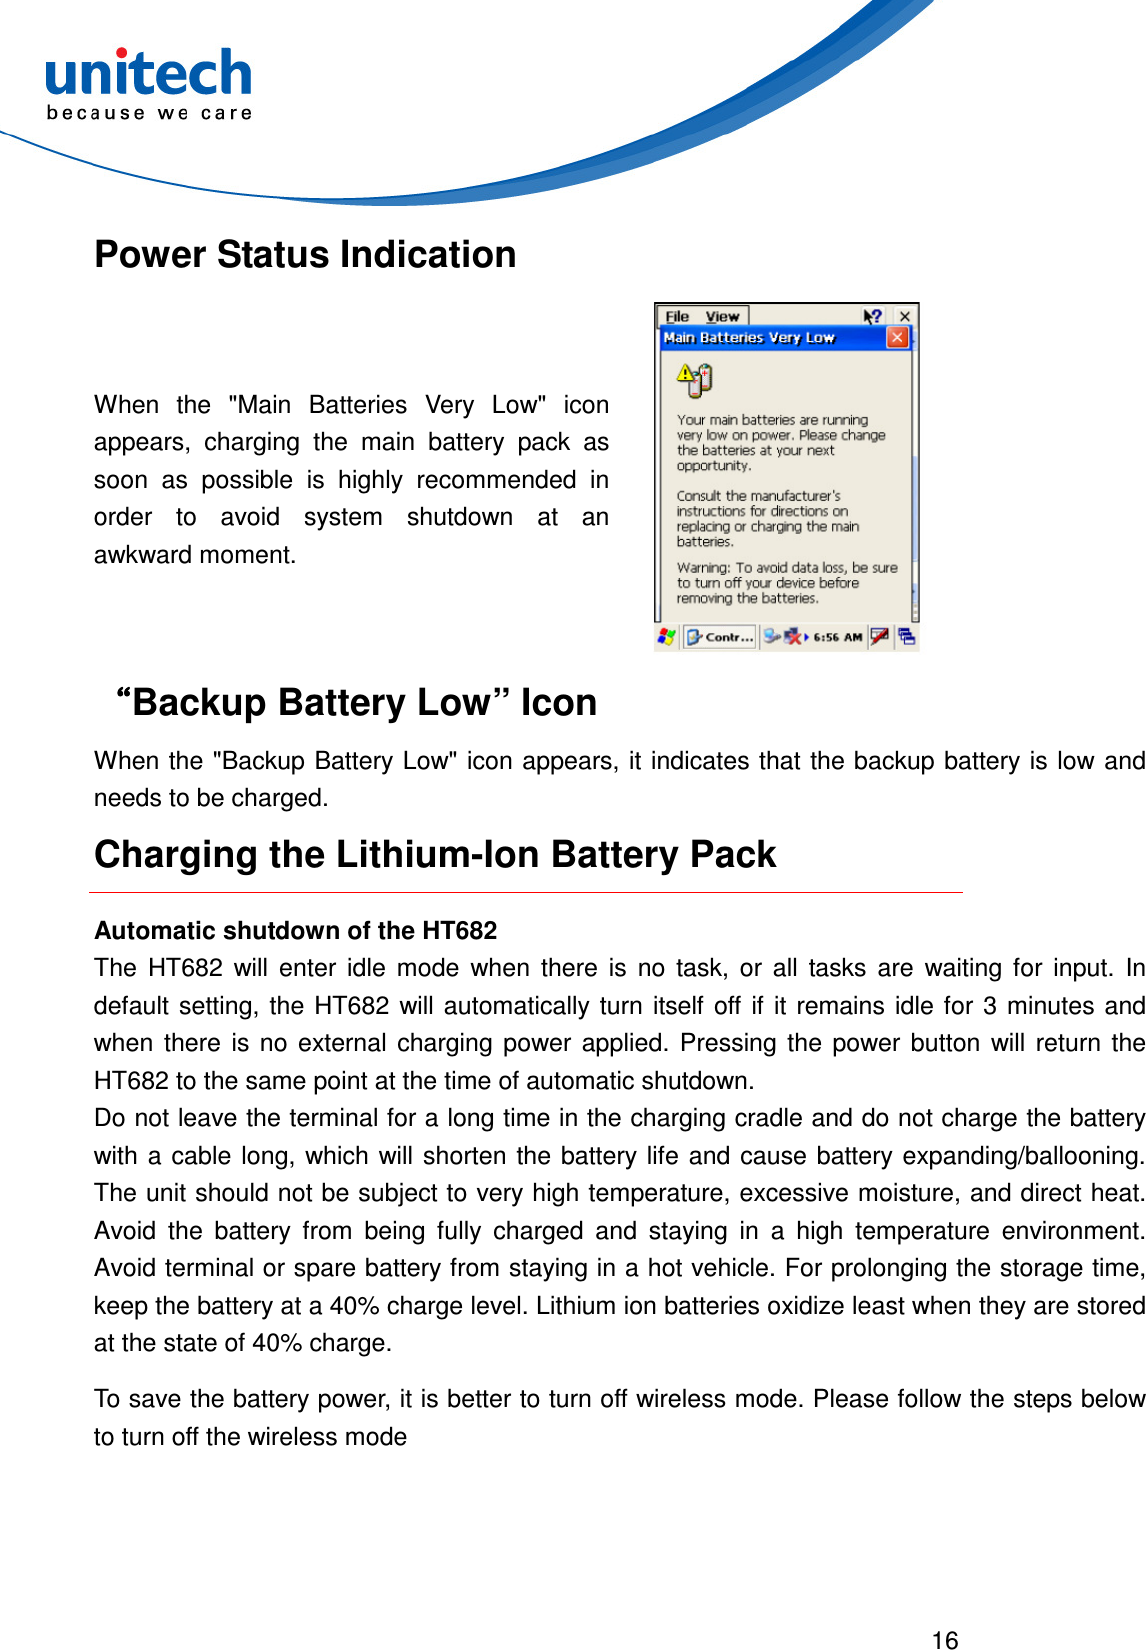  16  Power Status Indication When  the  &quot;Main  Batteries  Very  Low&quot;  icon appears,  charging  the  main  battery  pack  as soon  as  possible  is  highly  recommended  in order  to  avoid  system  shutdown  at  an awkward moment.  ““““Backup Battery Low” Icon When the &quot;Backup Battery Low&quot; icon appears, it indicates that the backup battery is low and needs to be charged. Charging the Lithium-Ion Battery Pack Automatic shutdown of the HT682 The  HT682  will  enter  idle  mode  when  there  is  no  task,  or  all  tasks  are  waiting  for  input.  In default  setting, the HT682  will automatically  turn  itself  off  if  it  remains  idle  for 3 minutes  and when  there  is  no  external  charging  power  applied.  Pressing  the  power  button  will  return  the HT682 to the same point at the time of automatic shutdown. Do not leave the terminal for a long time in the charging cradle and do not charge the battery with a  cable long, which will  shorten the battery life  and  cause battery expanding/ballooning. The unit should not be subject to very high temperature, excessive moisture, and direct heat. Avoid  the  battery  from  being  fully  charged  and  staying  in  a  high  temperature  environment. Avoid terminal or spare battery from staying in a hot vehicle. For prolonging the storage time, keep the battery at a 40% charge level. Lithium ion batteries oxidize least when they are stored at the state of 40% charge. To save the battery power, it is better to turn off wireless mode. Please follow the steps below to turn off the wireless mode 